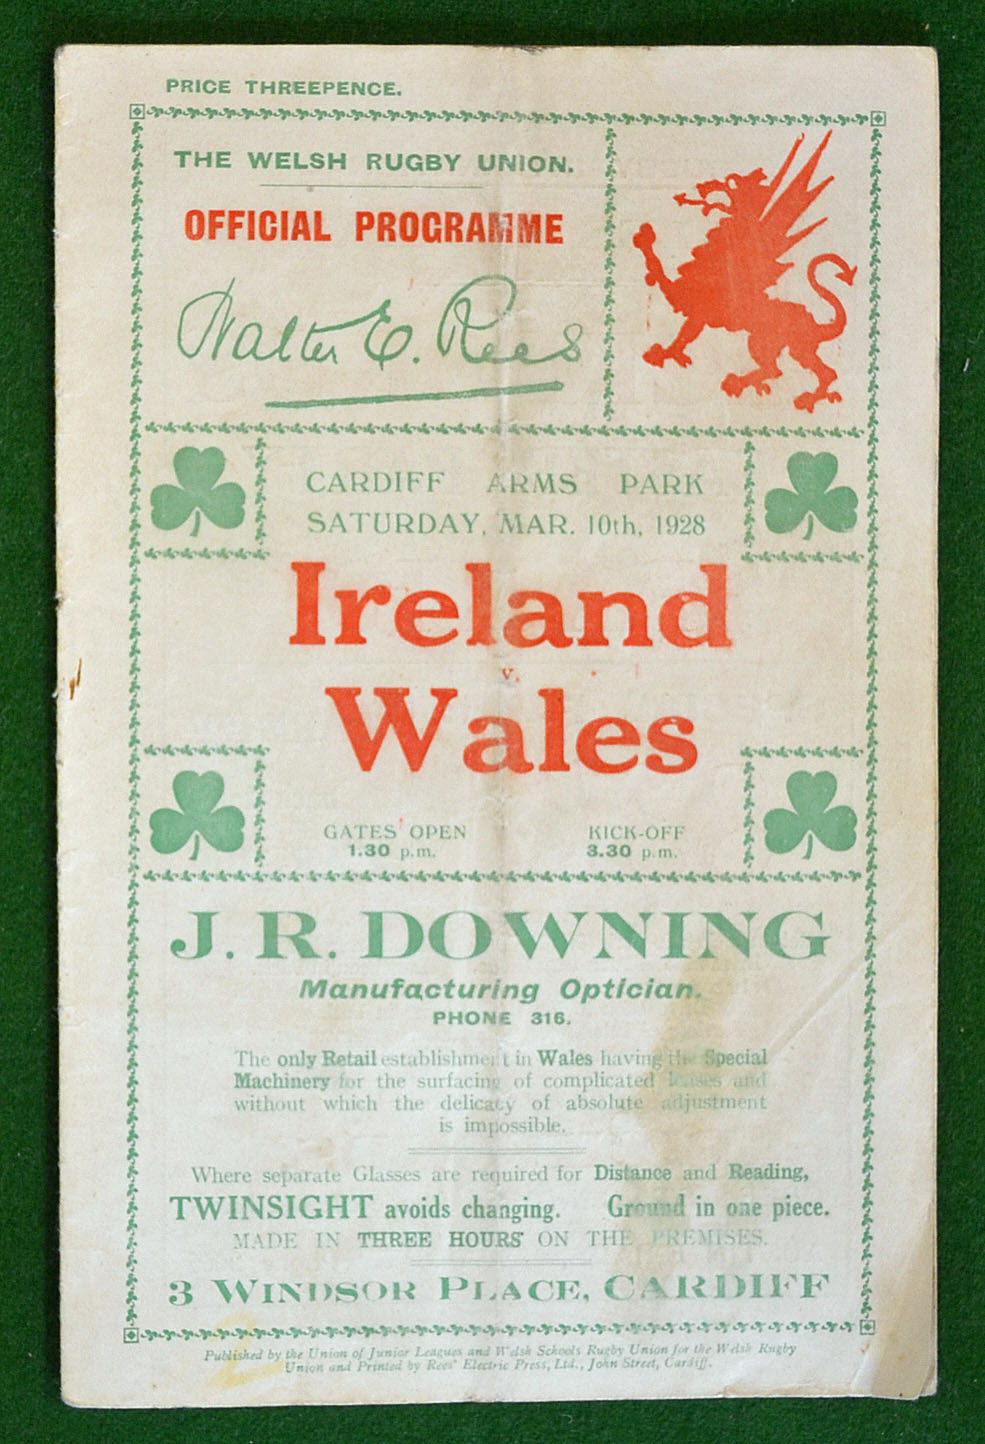 1928 Wales v Ireland rugby programme – played on 10th March at Cardiff Arms Park, - usual pocket